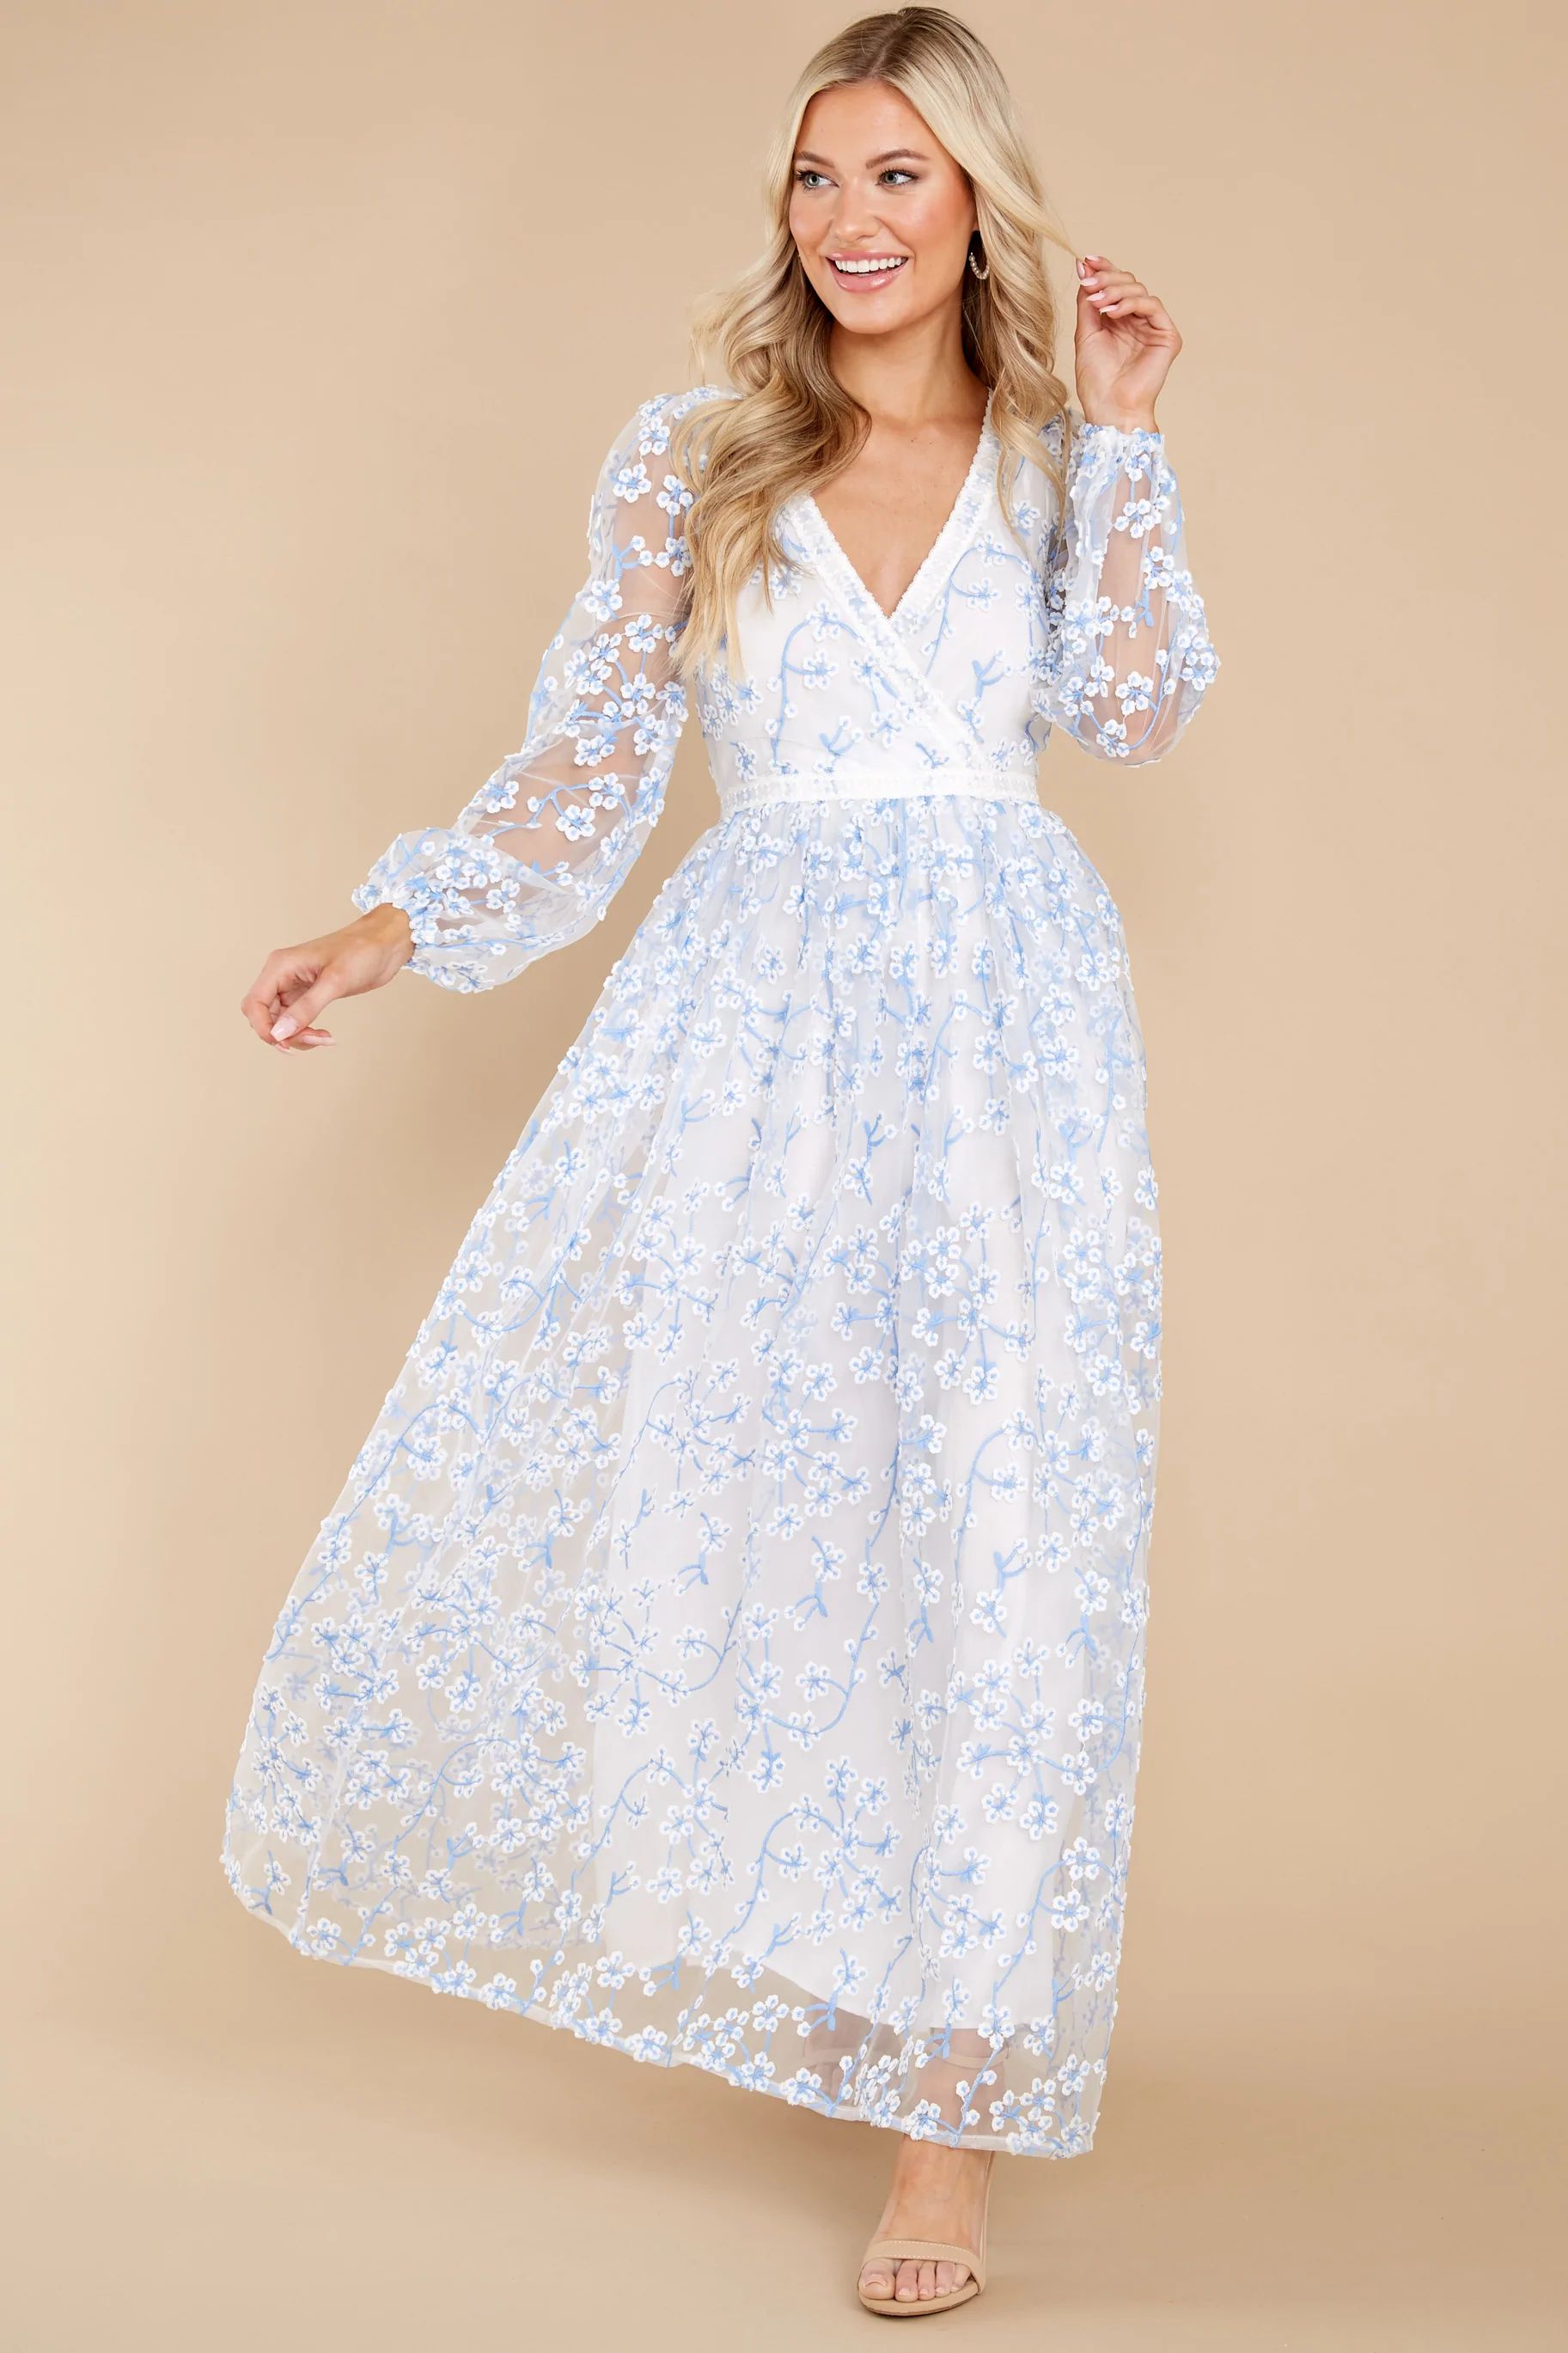 Heavenly Sights Blue And White Floral Embroidered Maxi Dress | Red Dress 